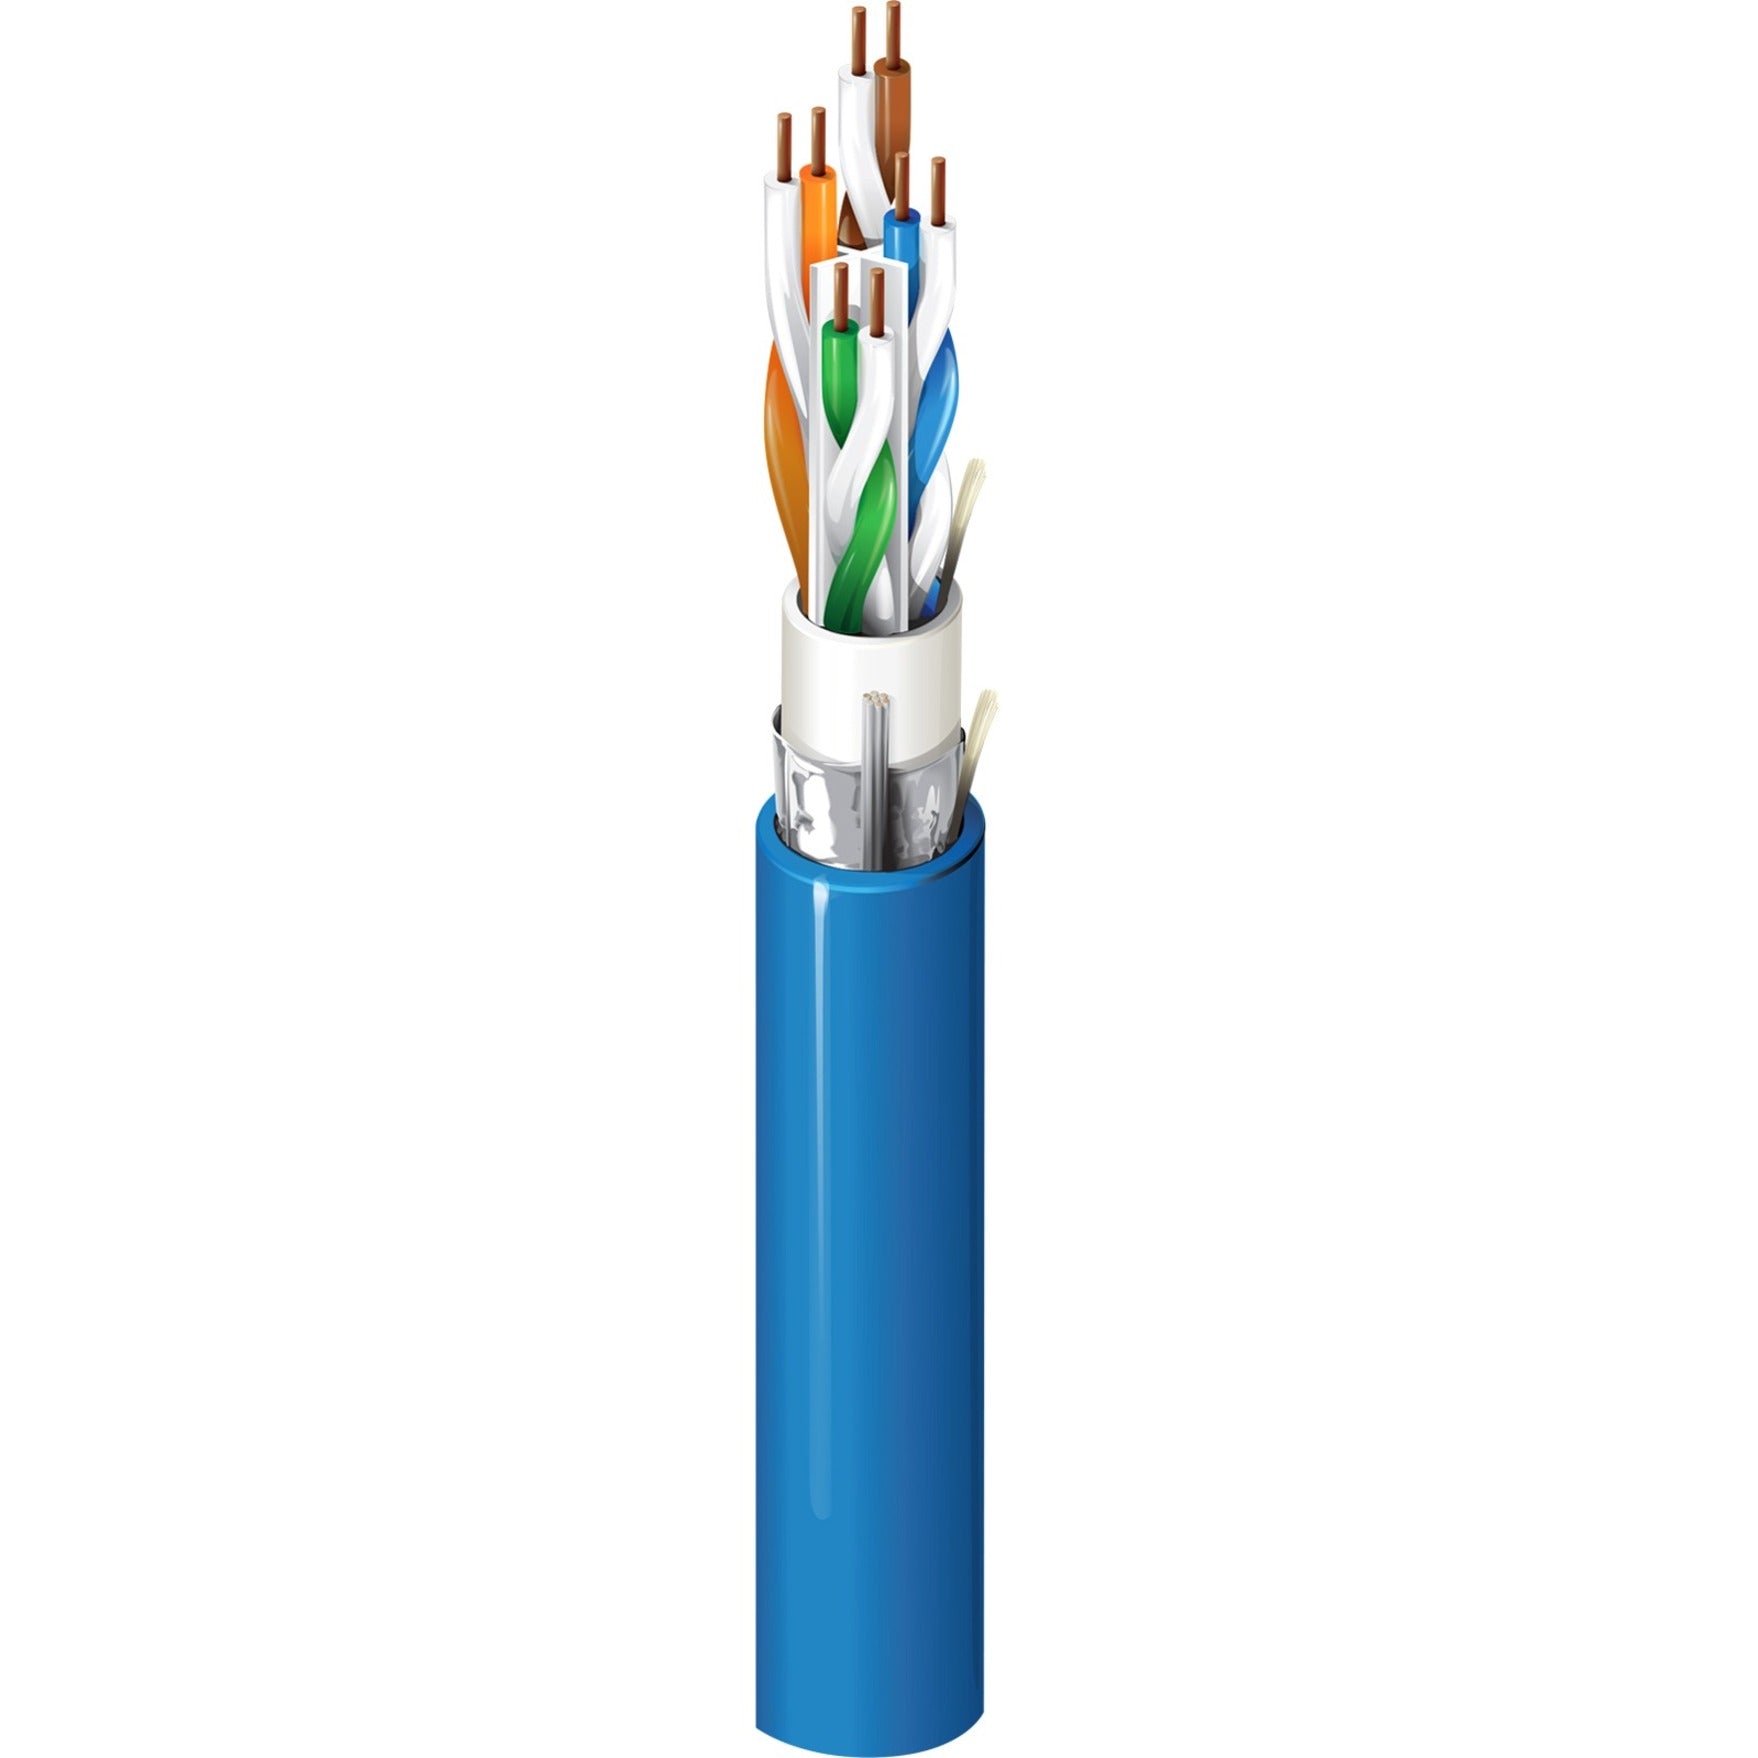 Belden 10GX63F 0101000 10GX63F Multi-Conductor - Enhanced Category 6A F/UTP Bonded-Pair Cable, 1000 ft, 10 Gbit/s Data Transfer Rate